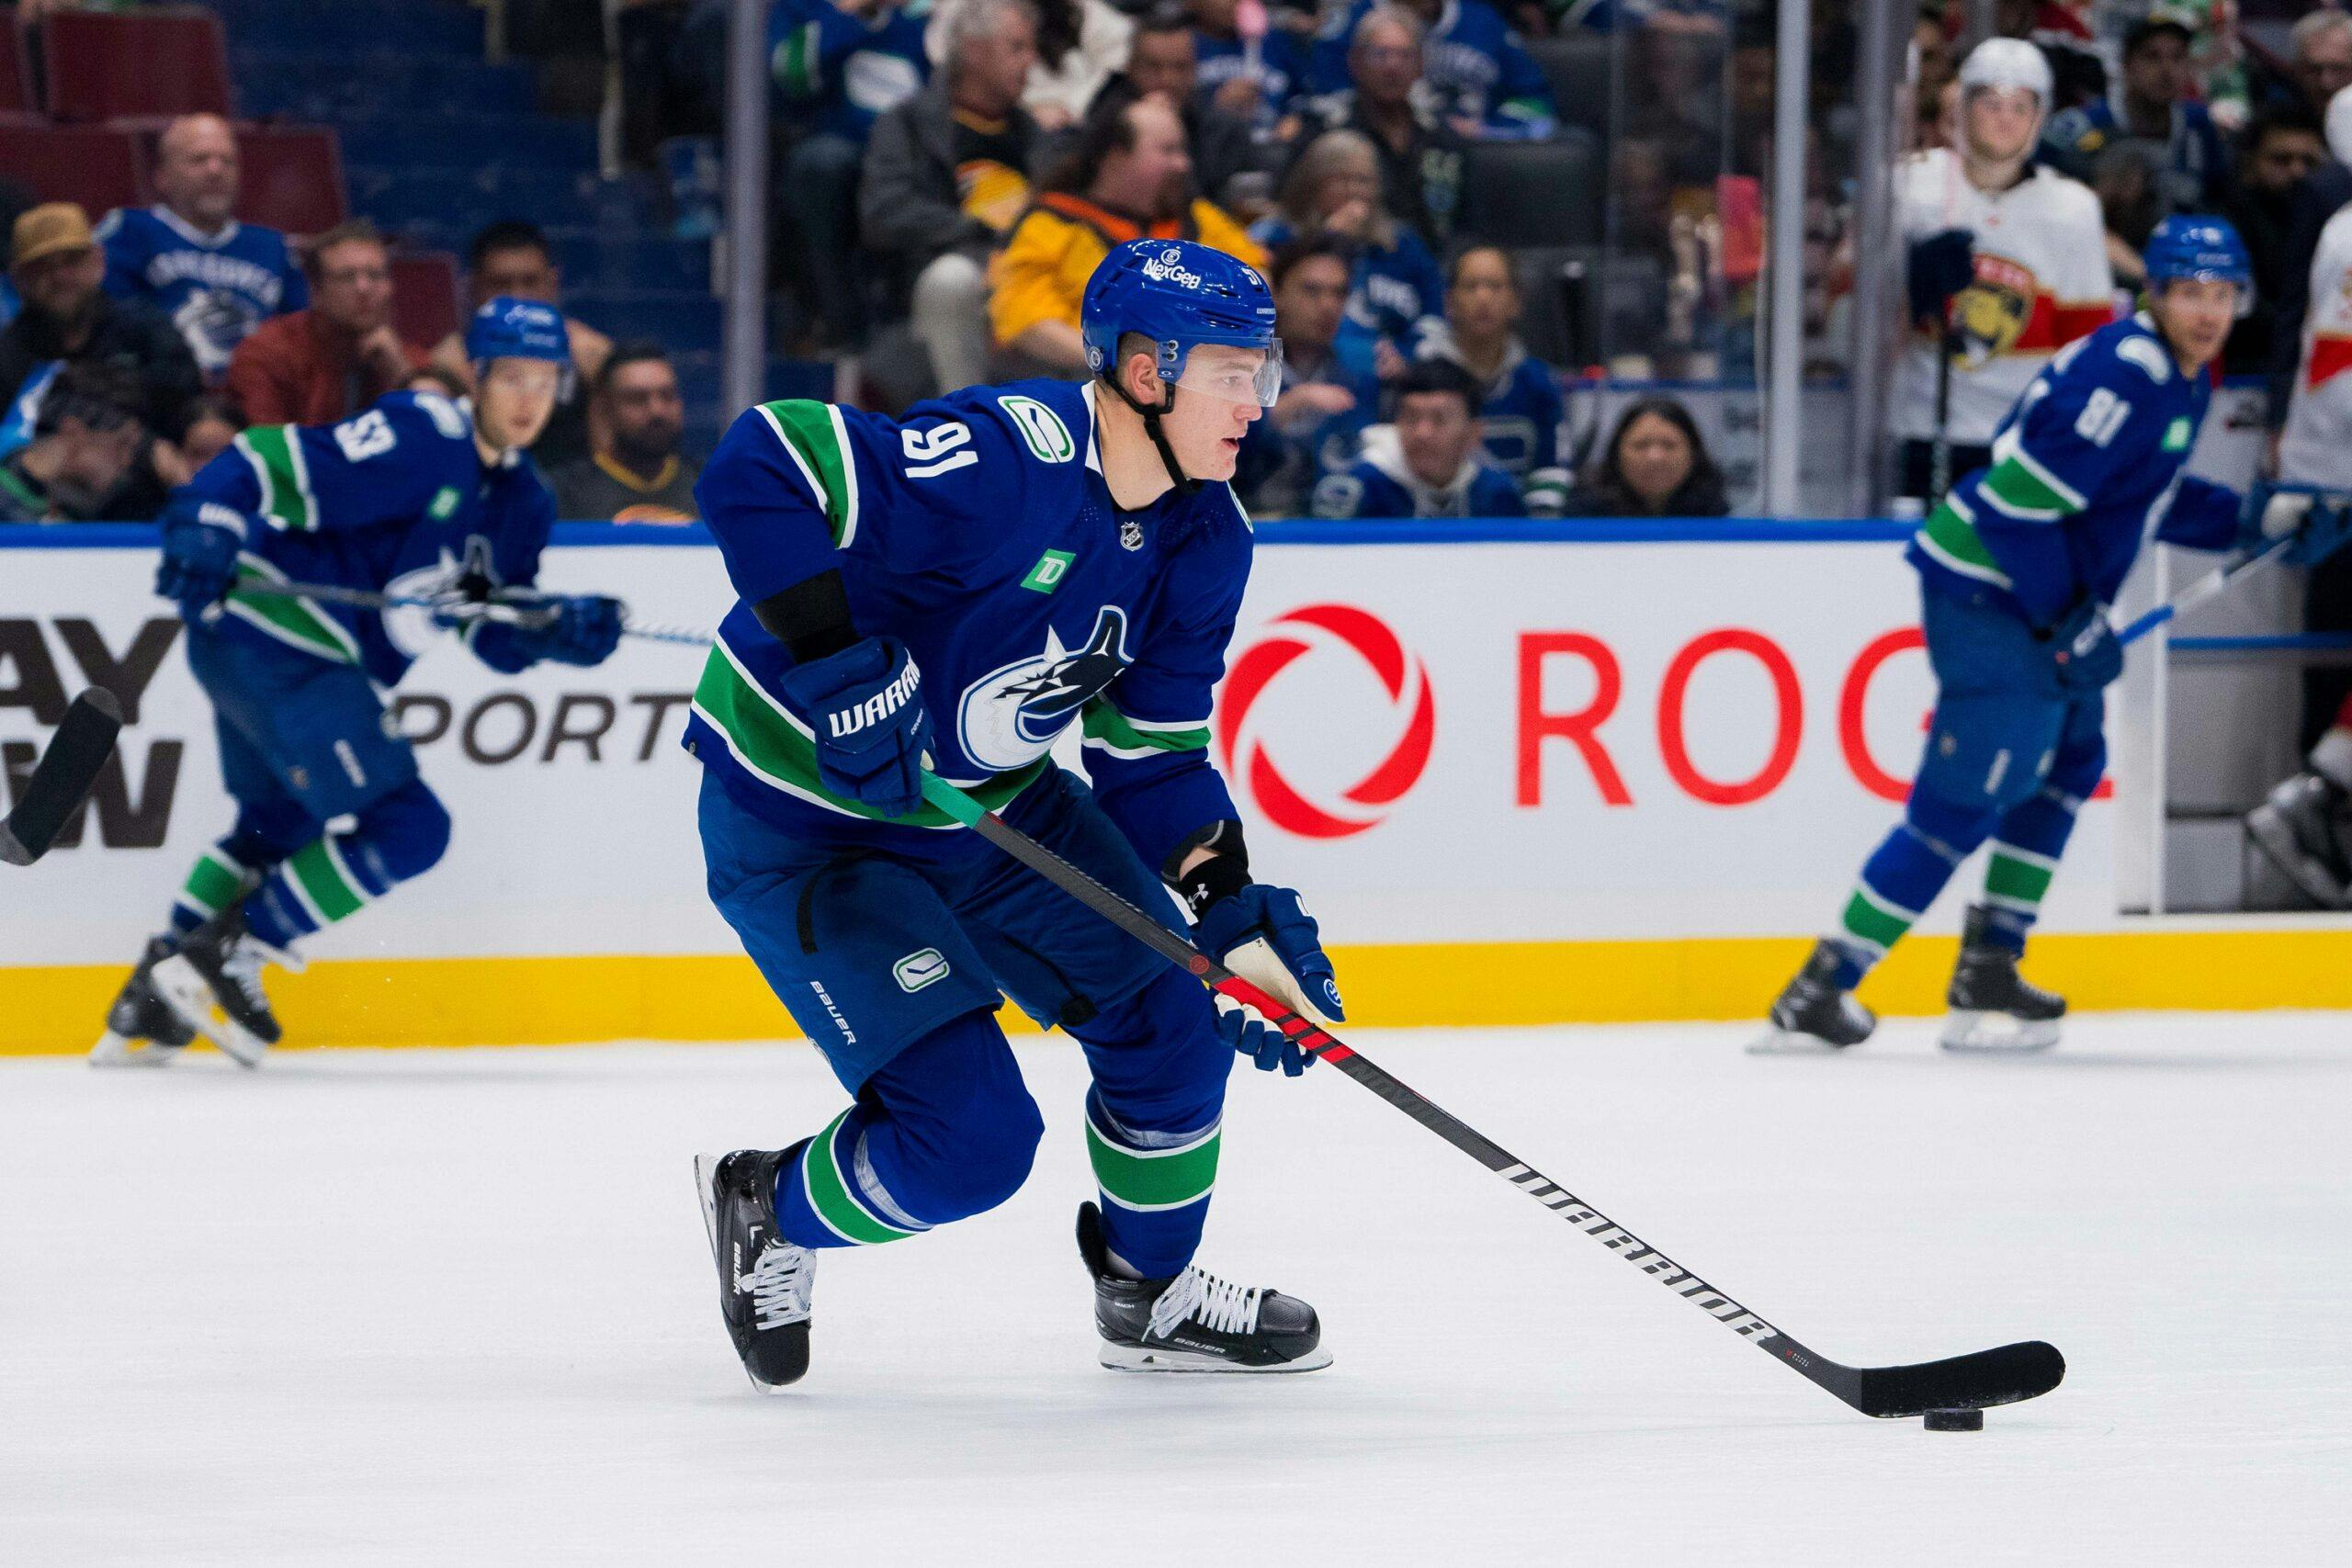 Vancouver Canucks’ Nikita Zadorov suspended two games for hit on Lucas Raymond